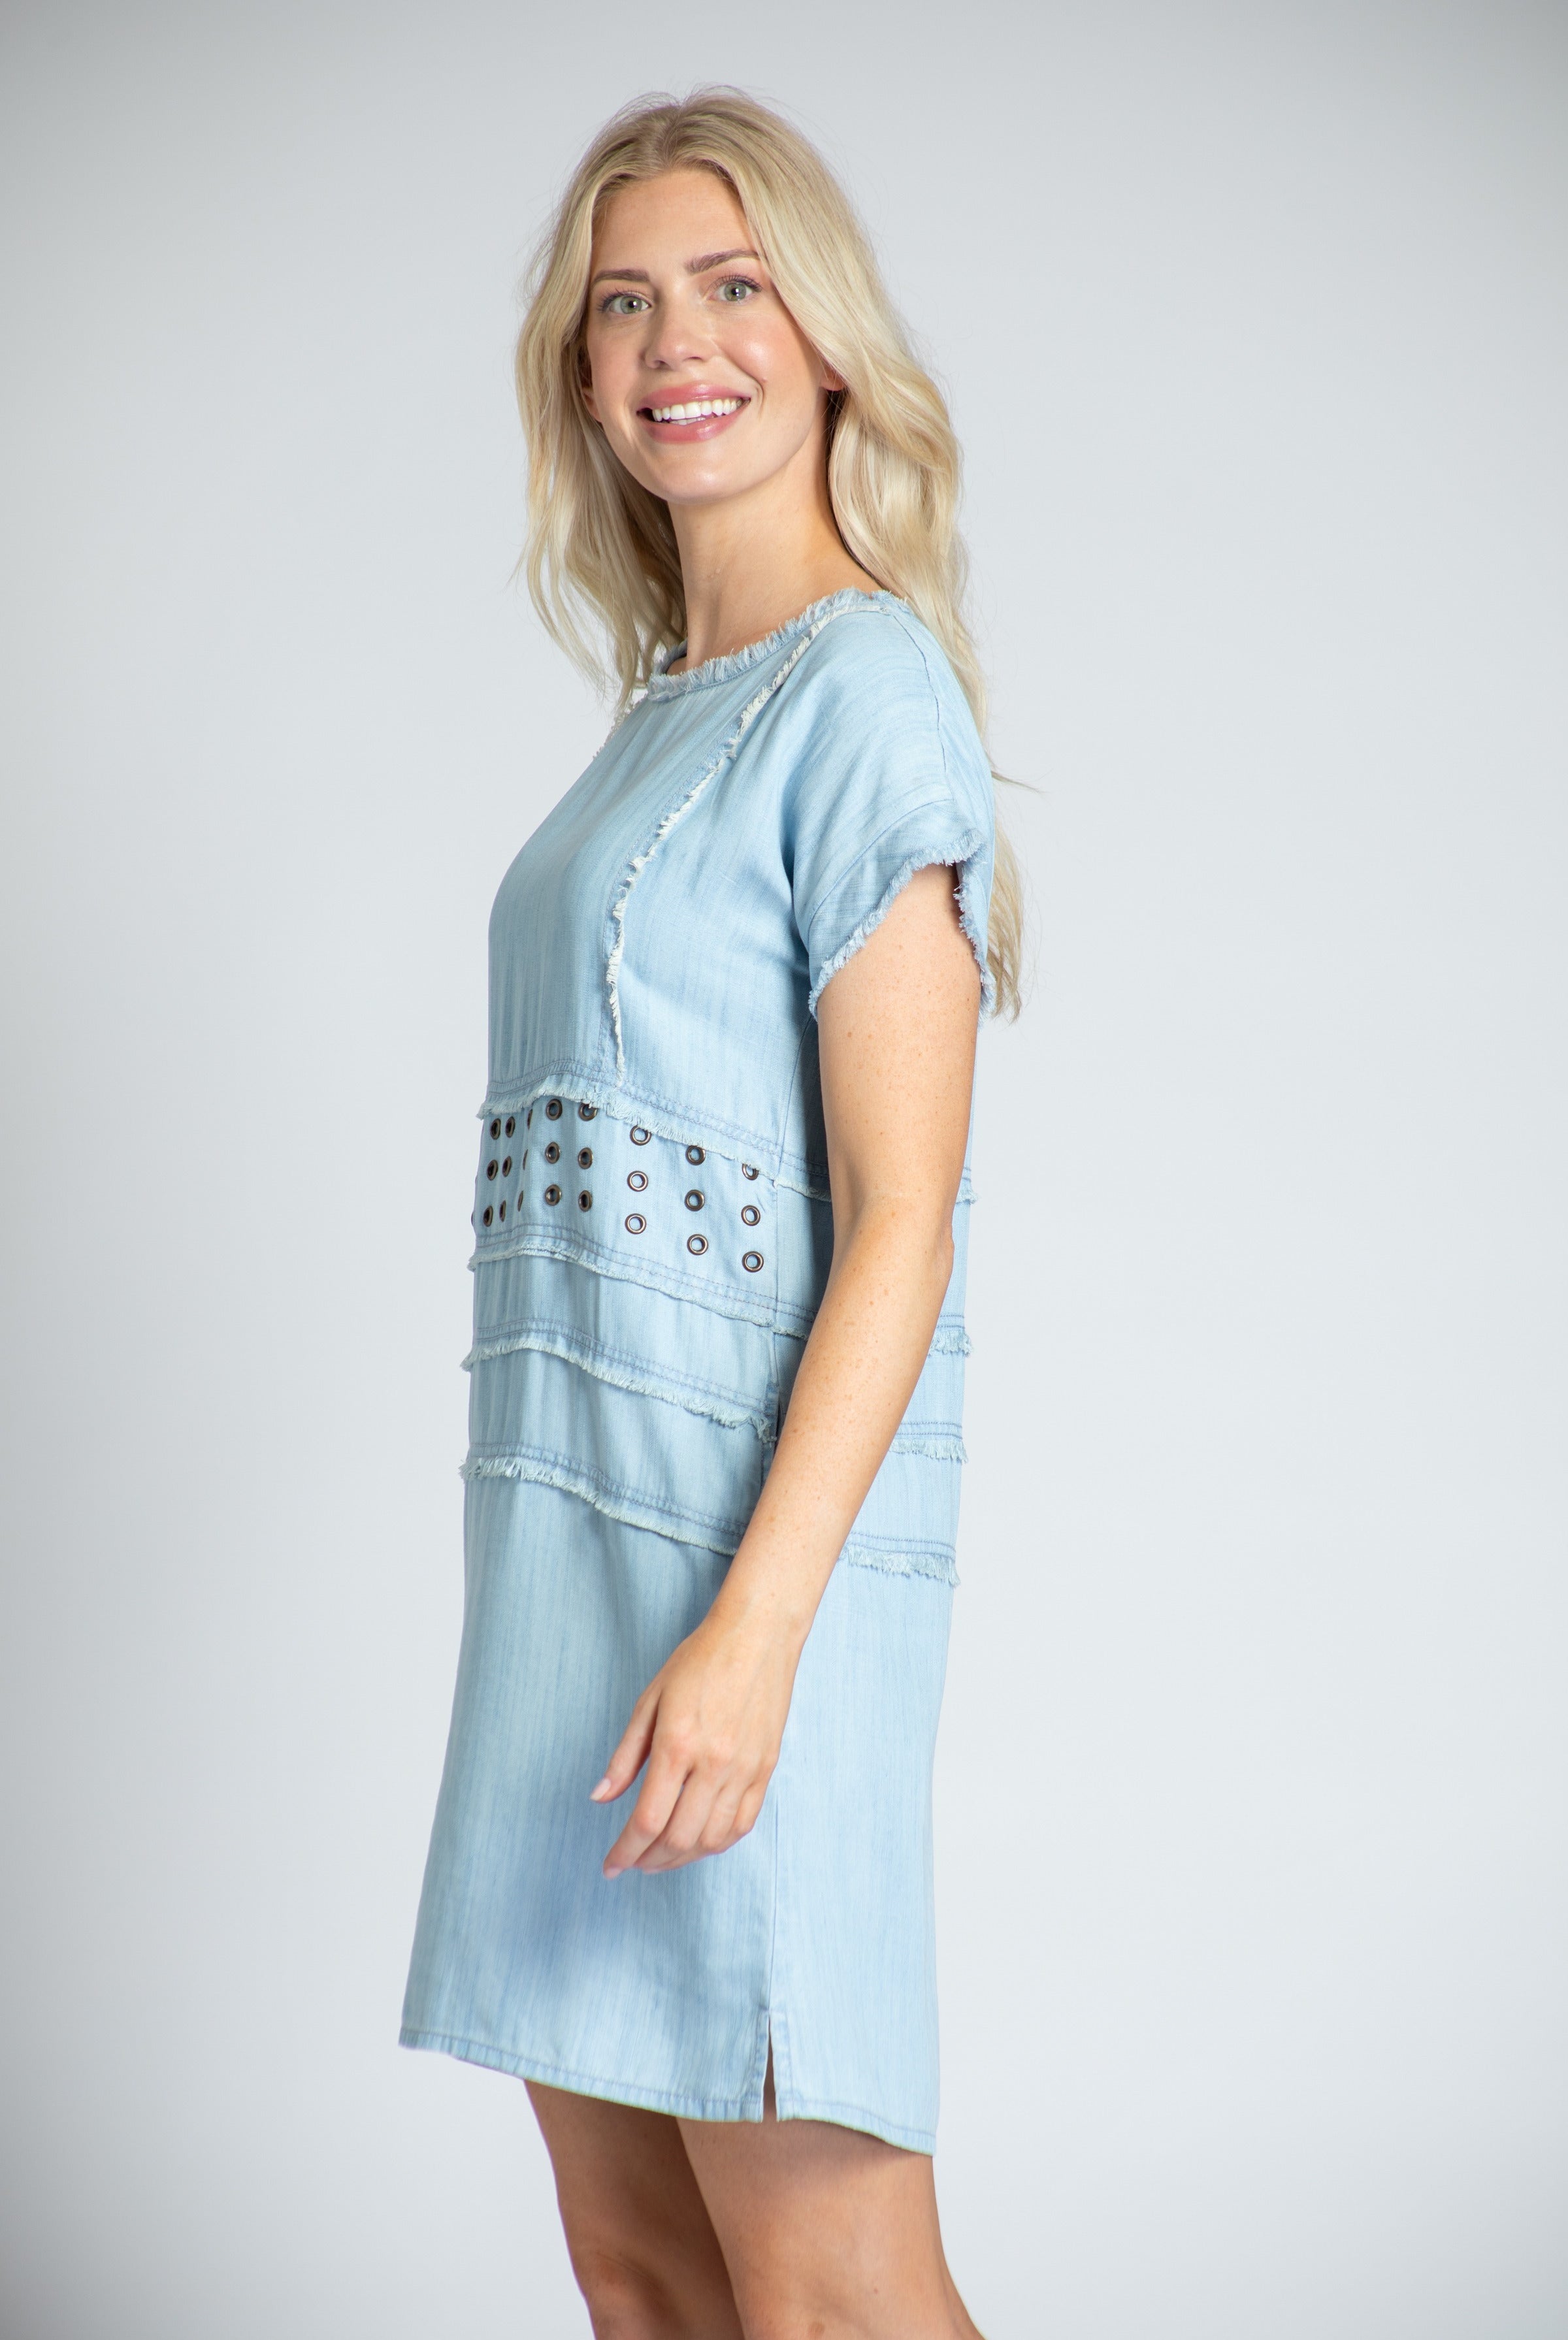  Grommet Dress With Frayed Seams